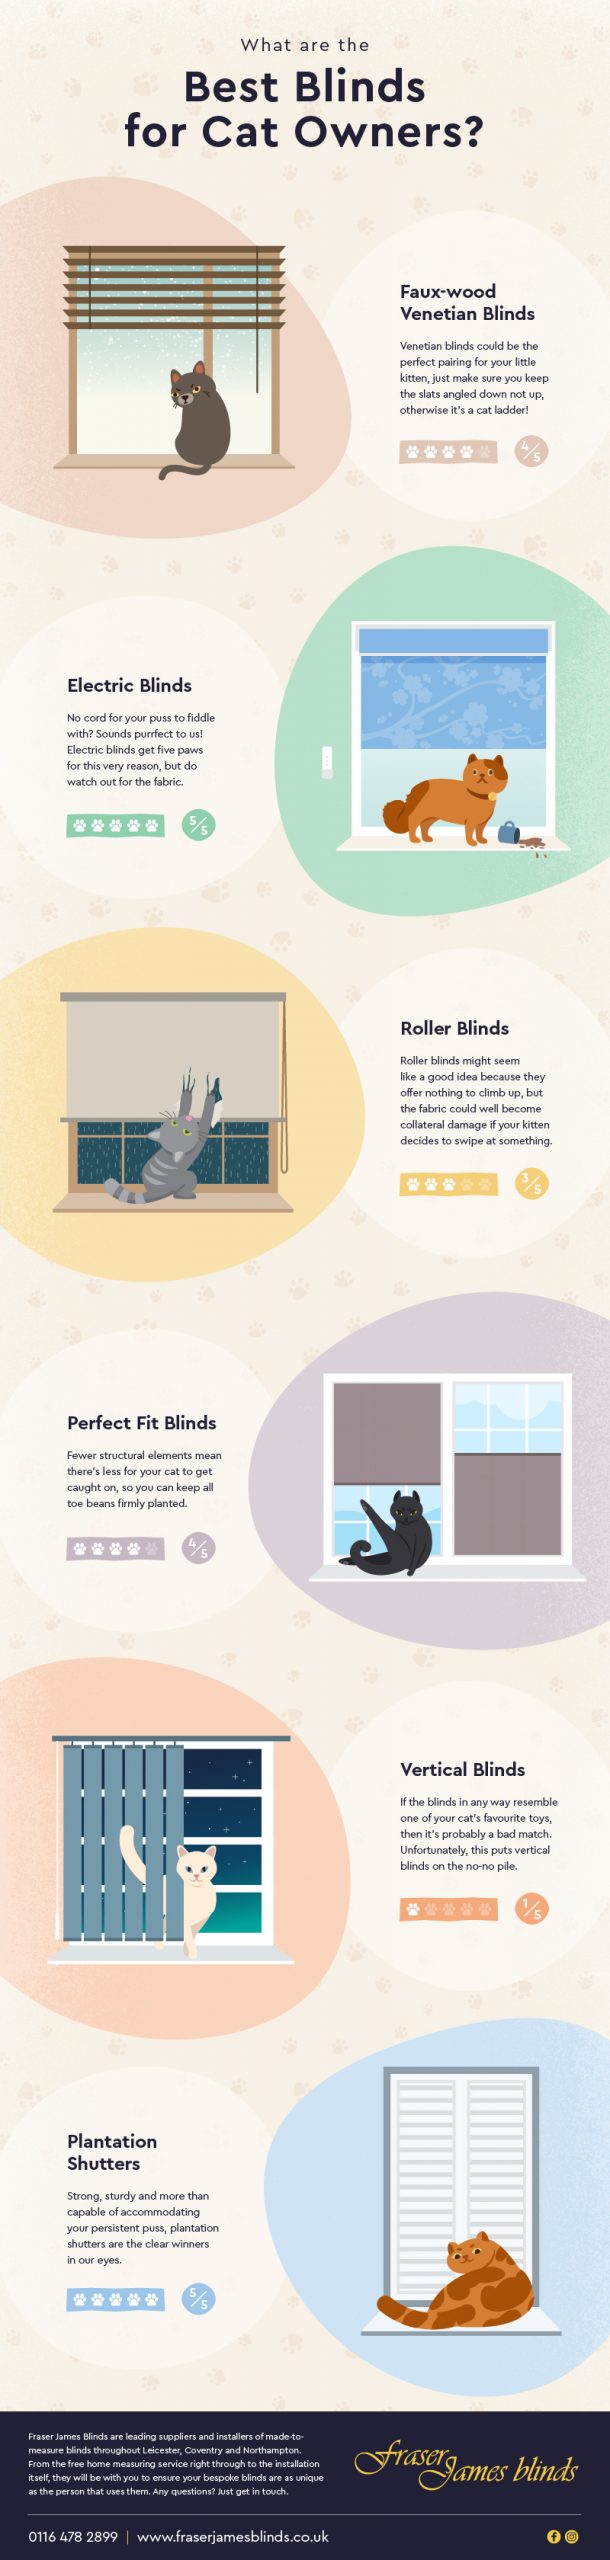 infographic best blinds for cats